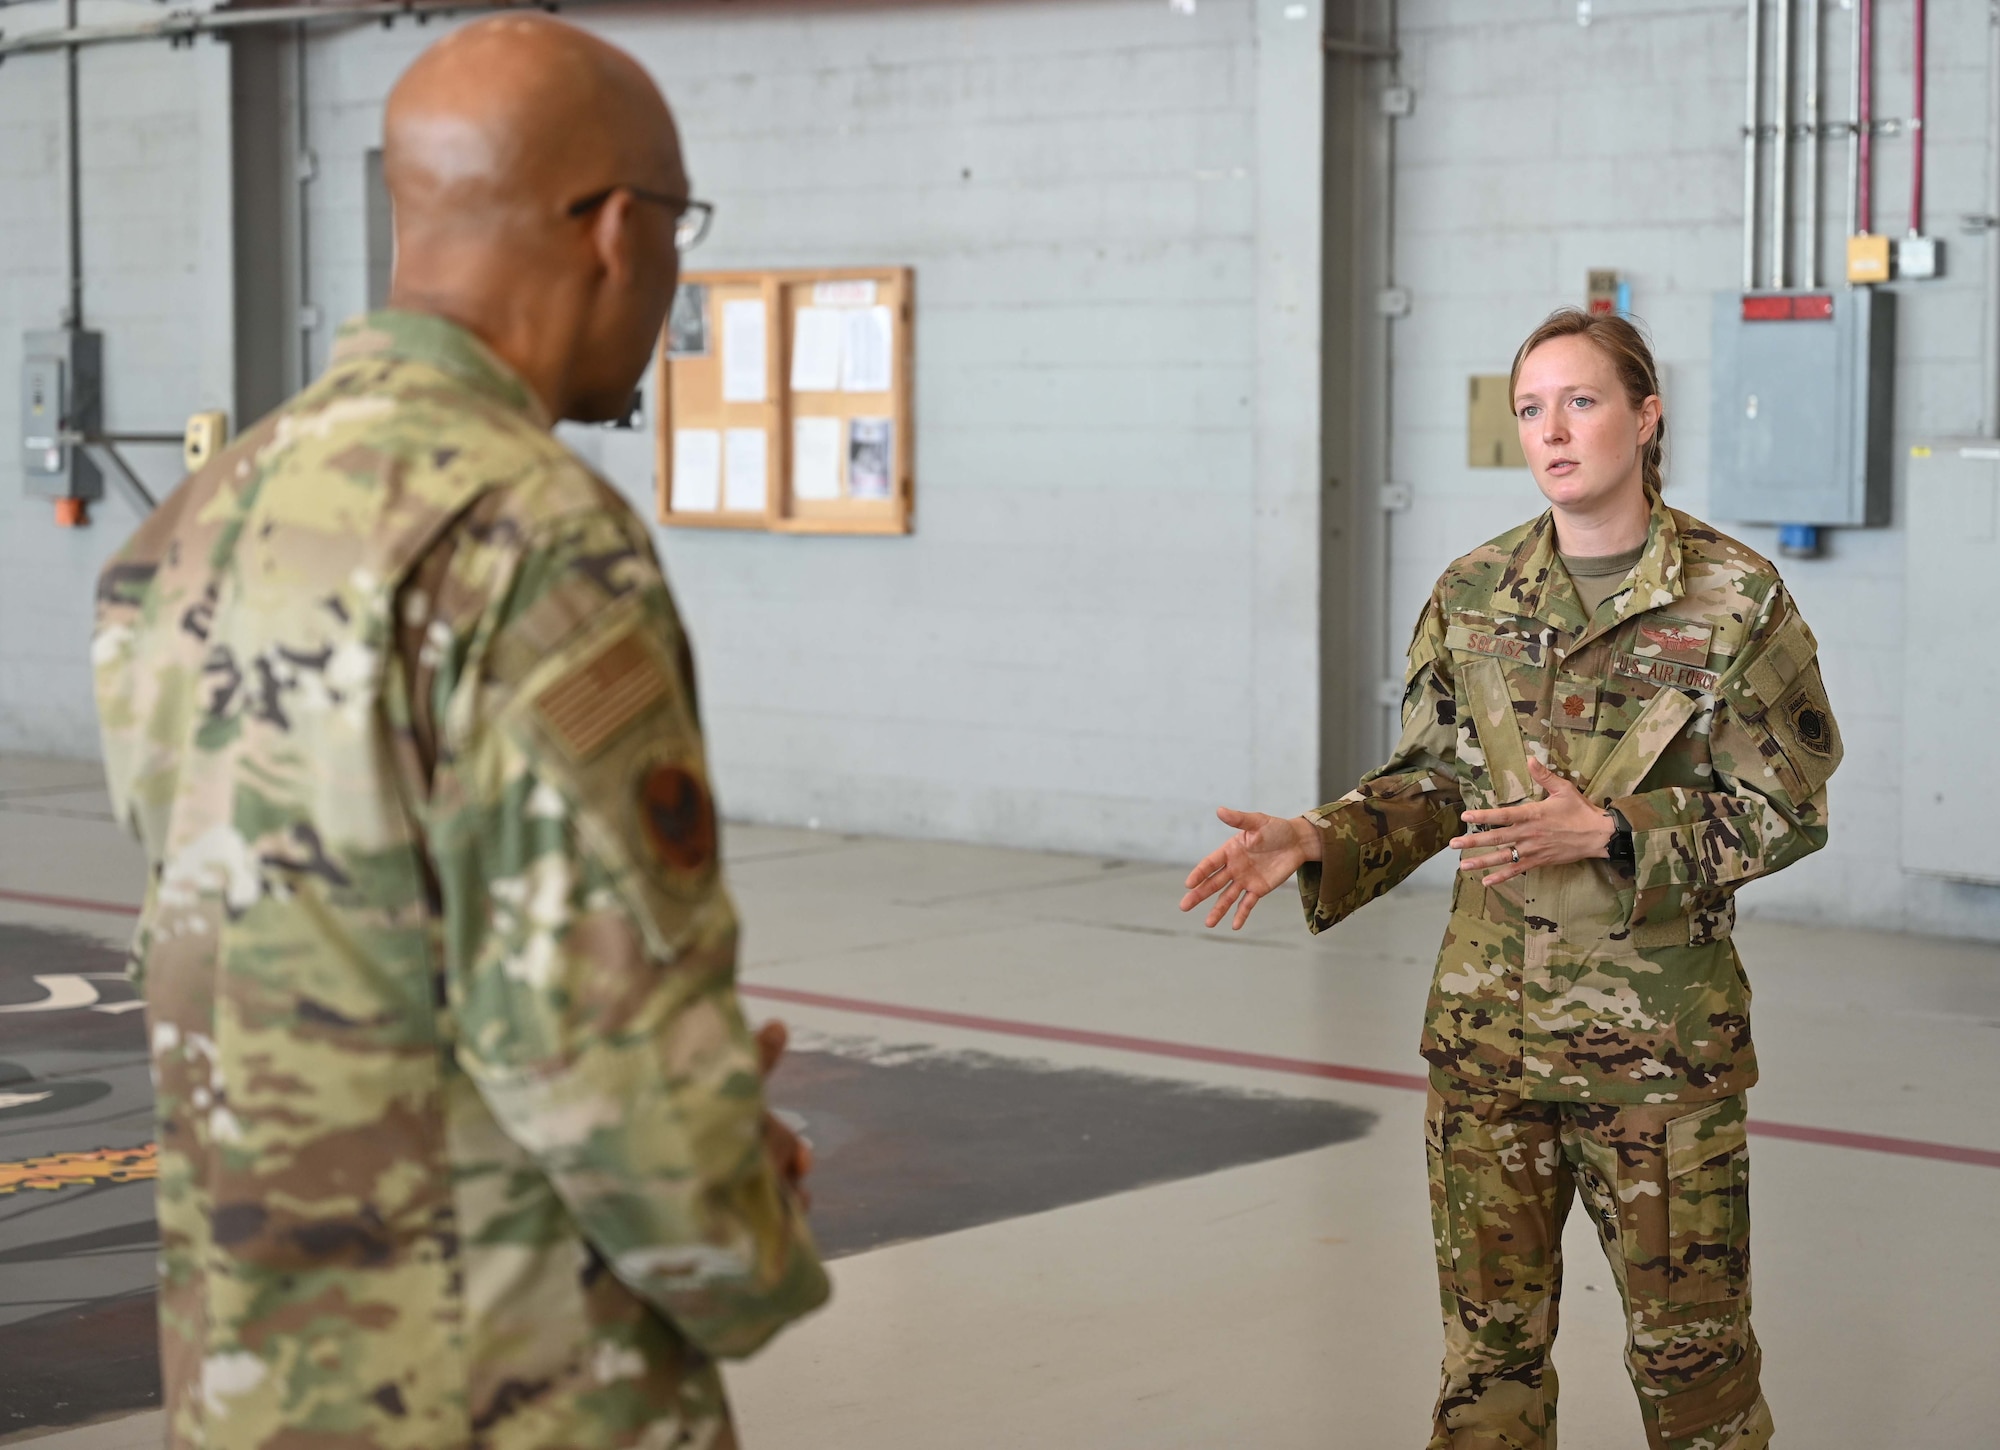 U.S. Air Force Maj. Auriele Soltisz, AC-130J Ghostrider pilot with the 4th Special Operations Squadron, briefs Air Force Chief of Staff Gen. CQ Brown, Jr., on Aviation Special Operations Task Units during his visit to Hurlburt Field, Florida, April 4, 2022. Brown’s visit also familiarized him with Air Force Special Operations Command’s Force Generation Model to include: Mission Sustainment Teams and Special Operations Task Groups. Additionally, Brown held a sensing session with junior enlisted Airmen to discuss challenges faced in the command. (U.S. Air Force photo by Staff Sgt. Brandon Esau)